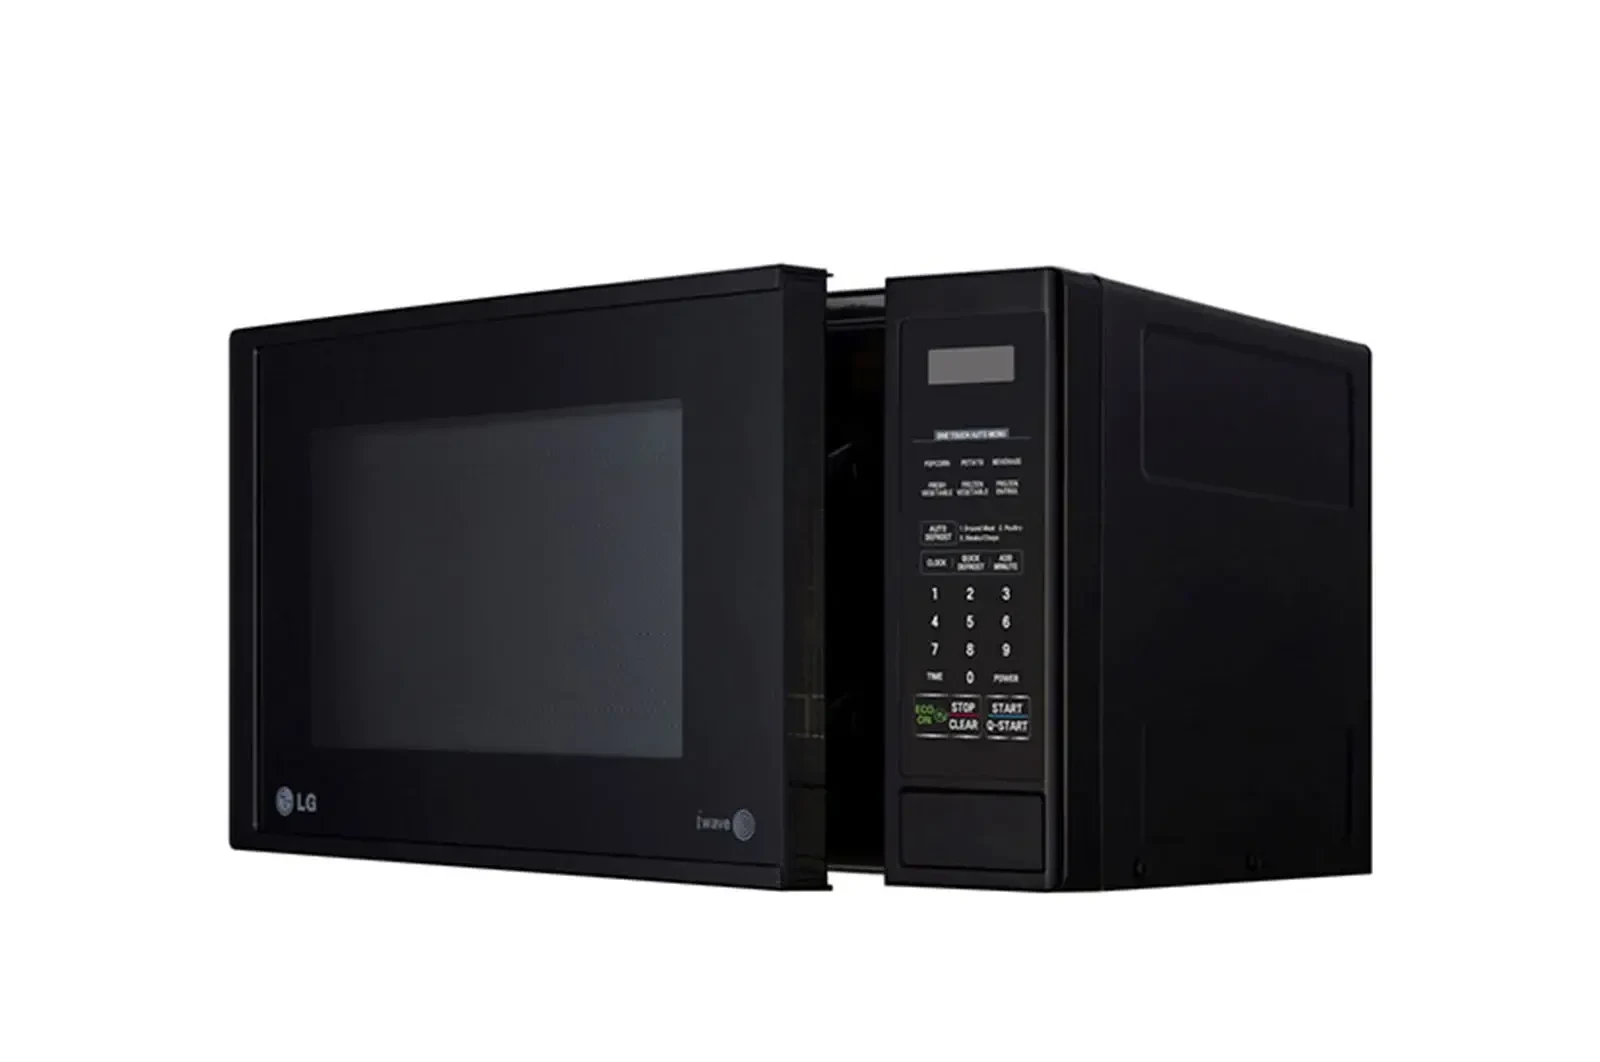 LG MS2044DMB 700W 20L Microwave Oven